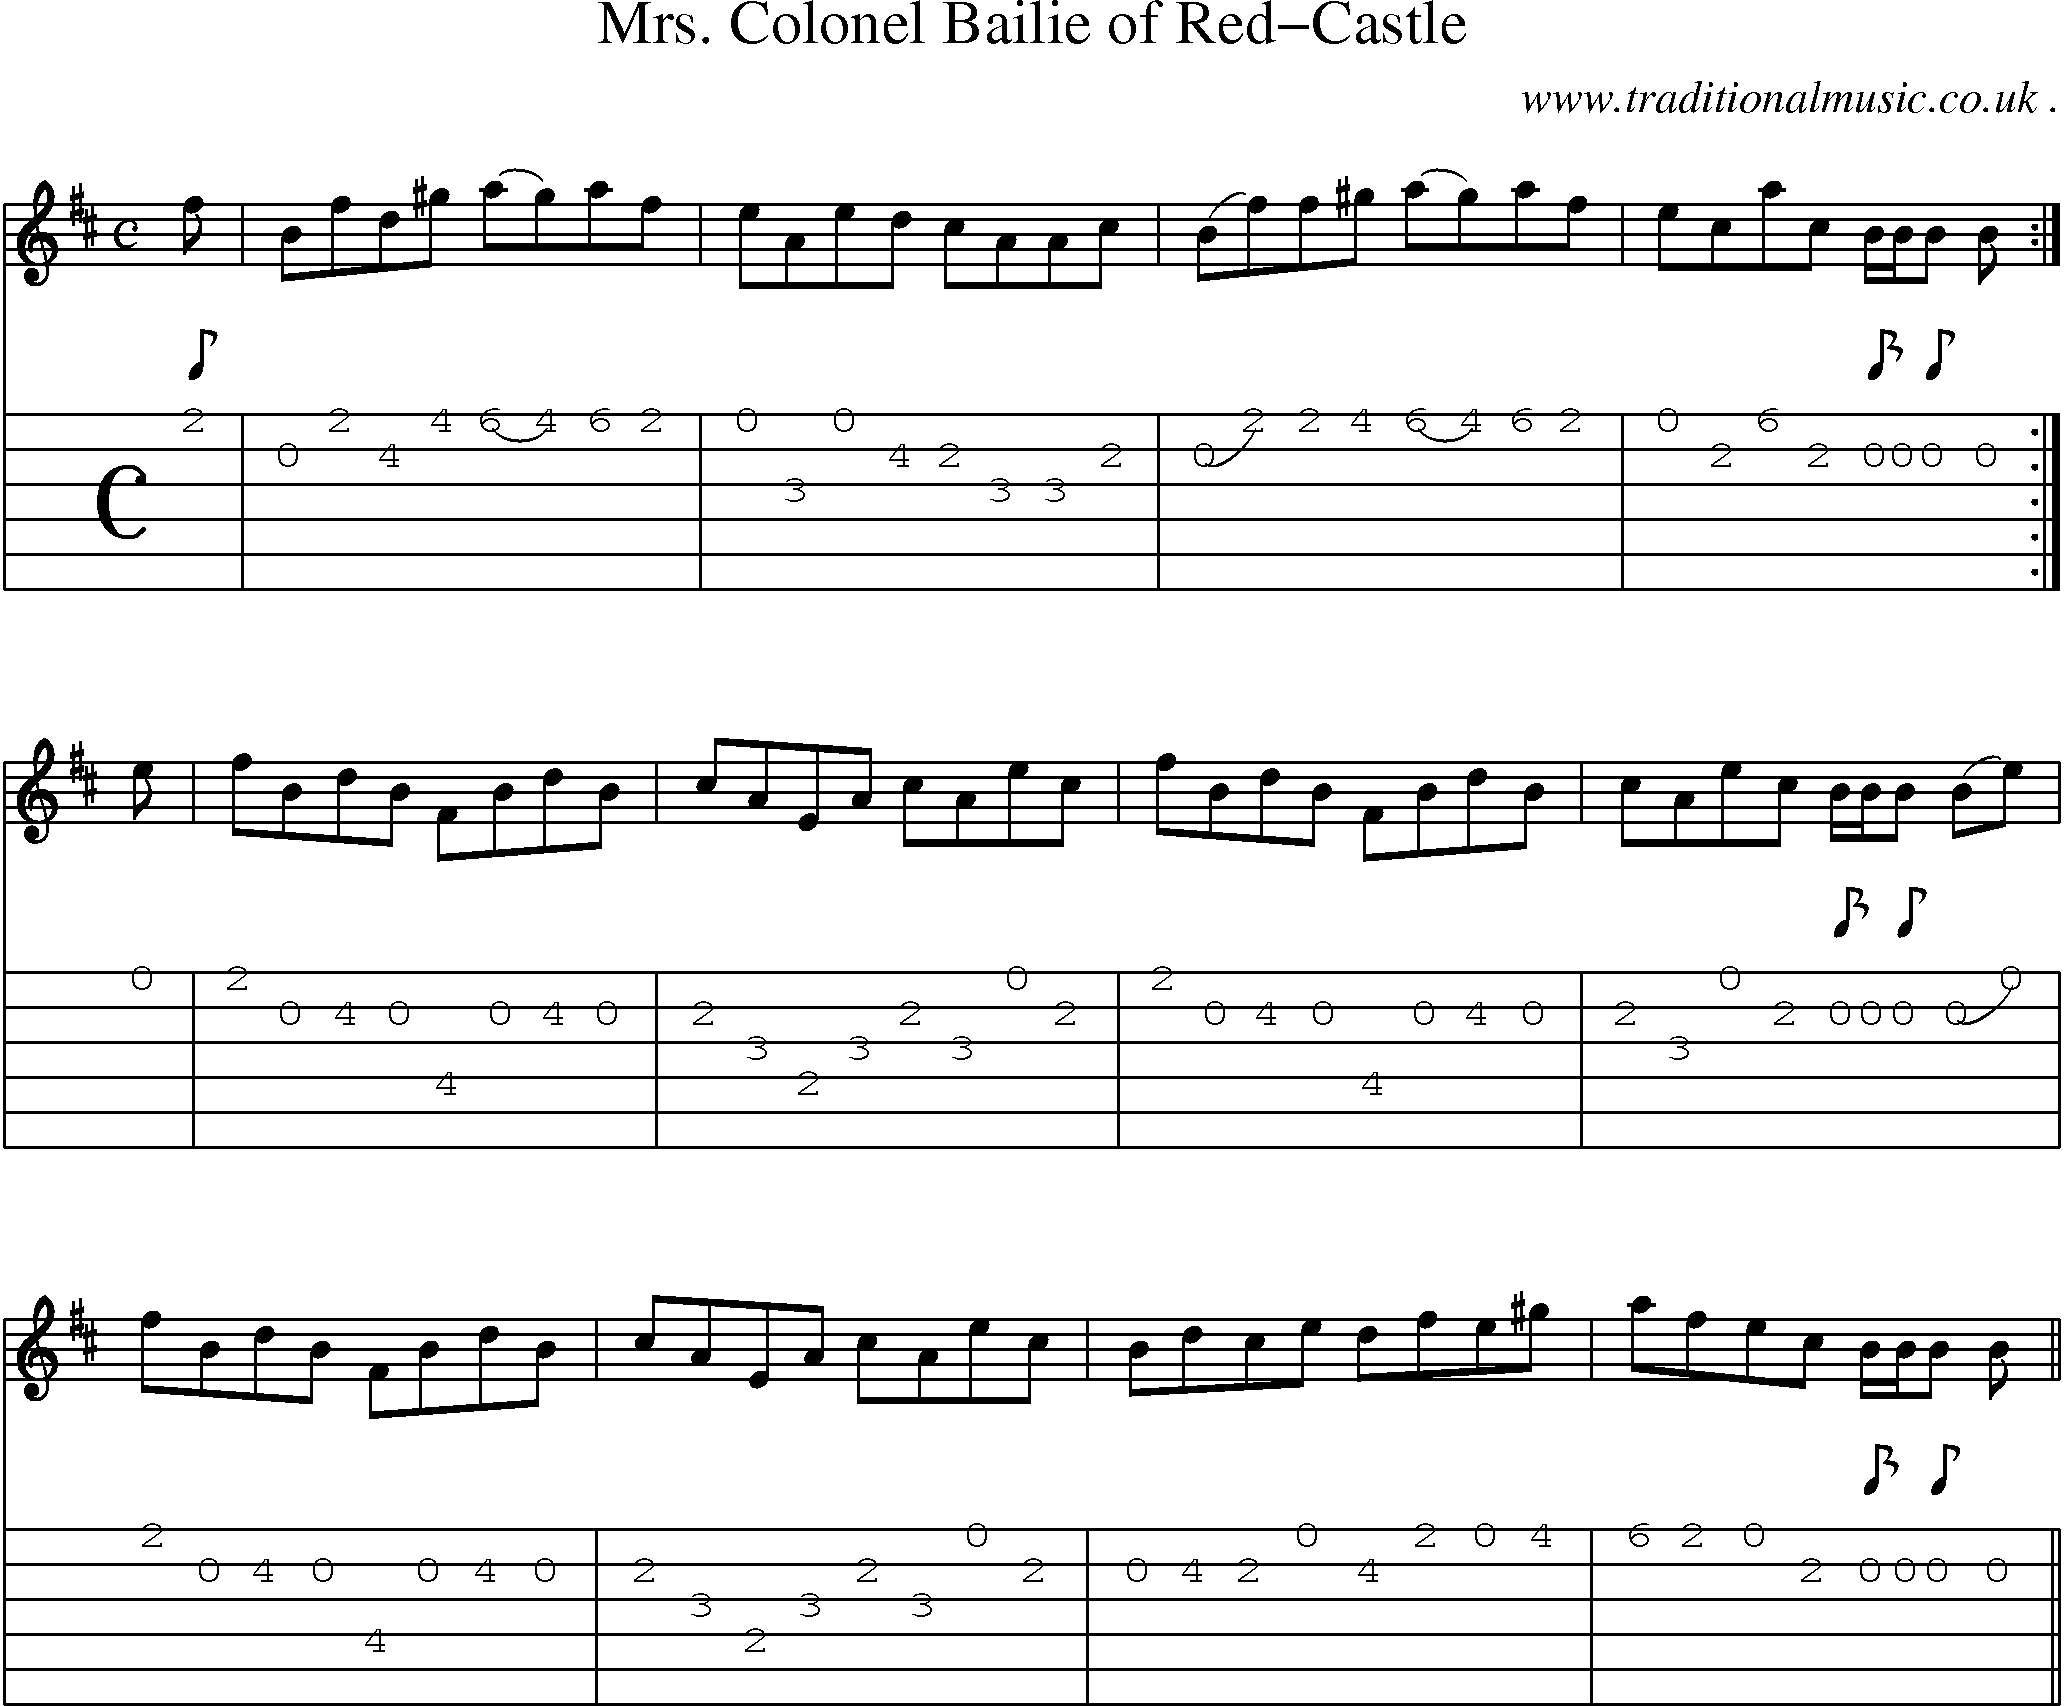 Sheet-music  score, Chords and Guitar Tabs for Mrs Colonel Bailie Of Red-castle